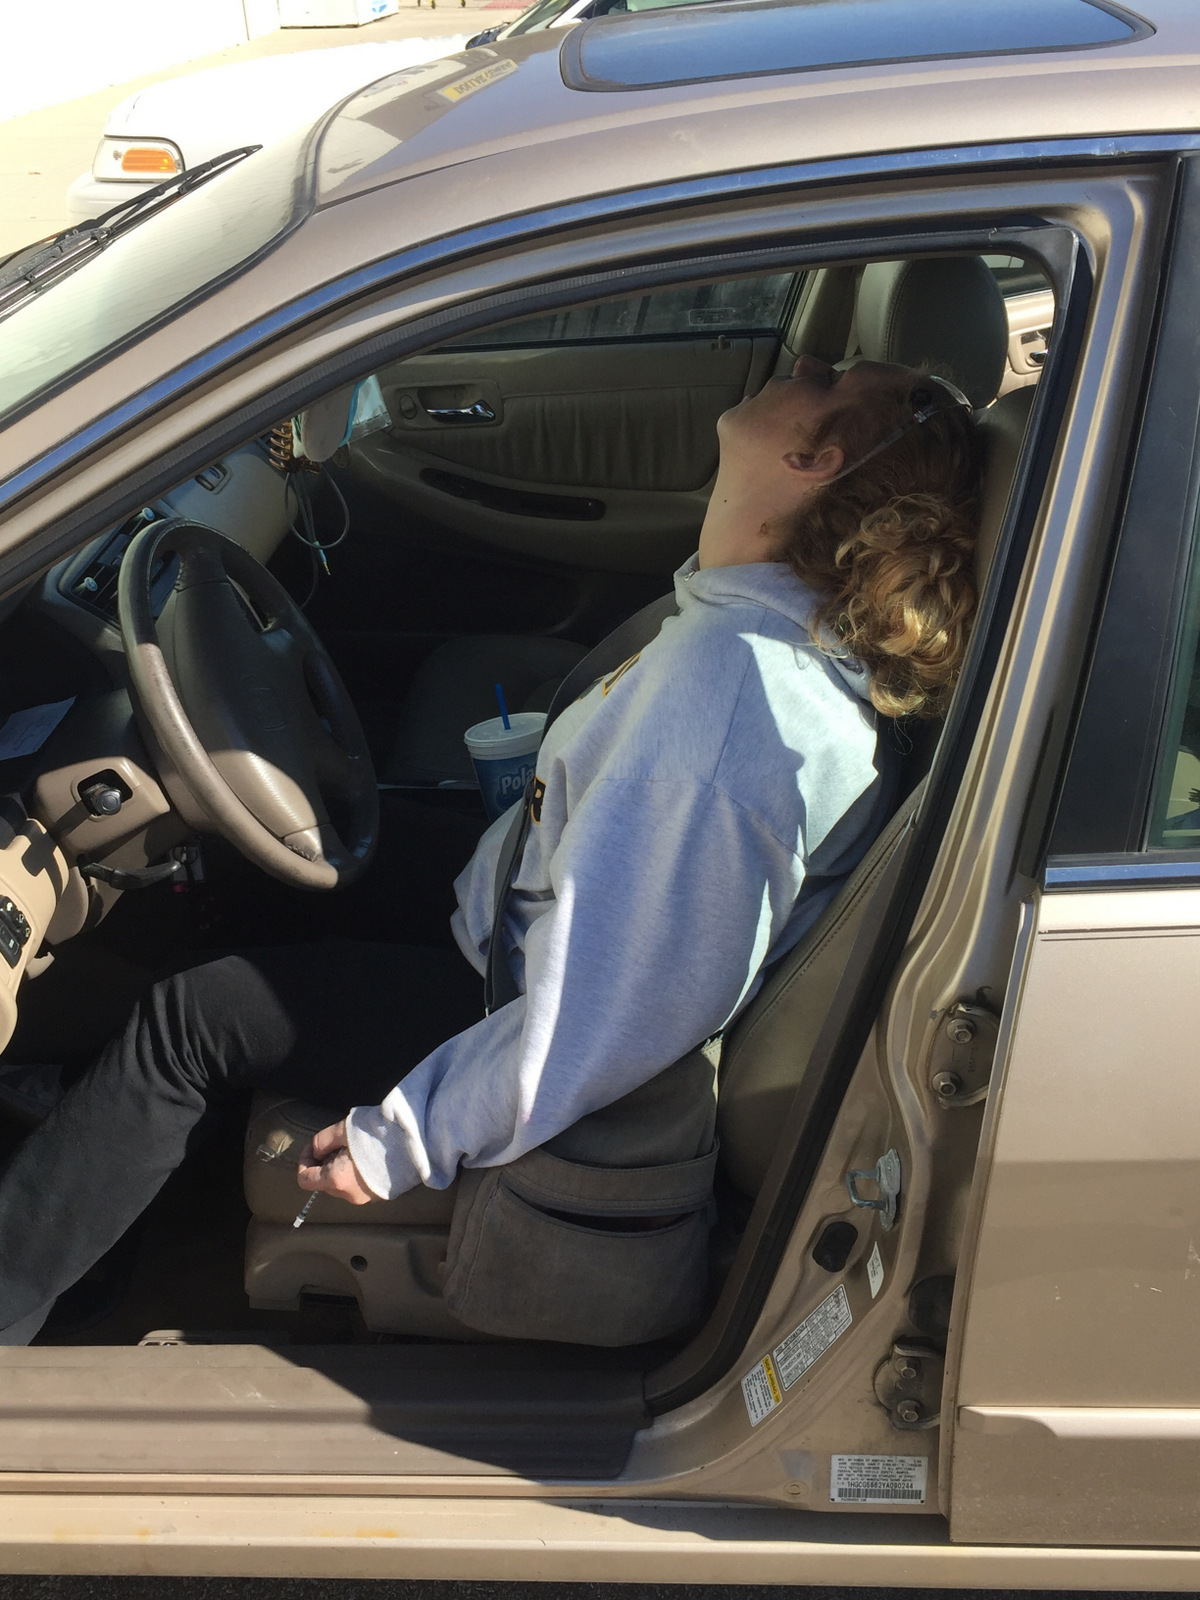 Erika Hurt sits with her baby in the back seat of the car in Hope, Ind. Police said she appeared unresponsive from an overdose and had a syringe in her hand. (Town of Hope PD/AP)